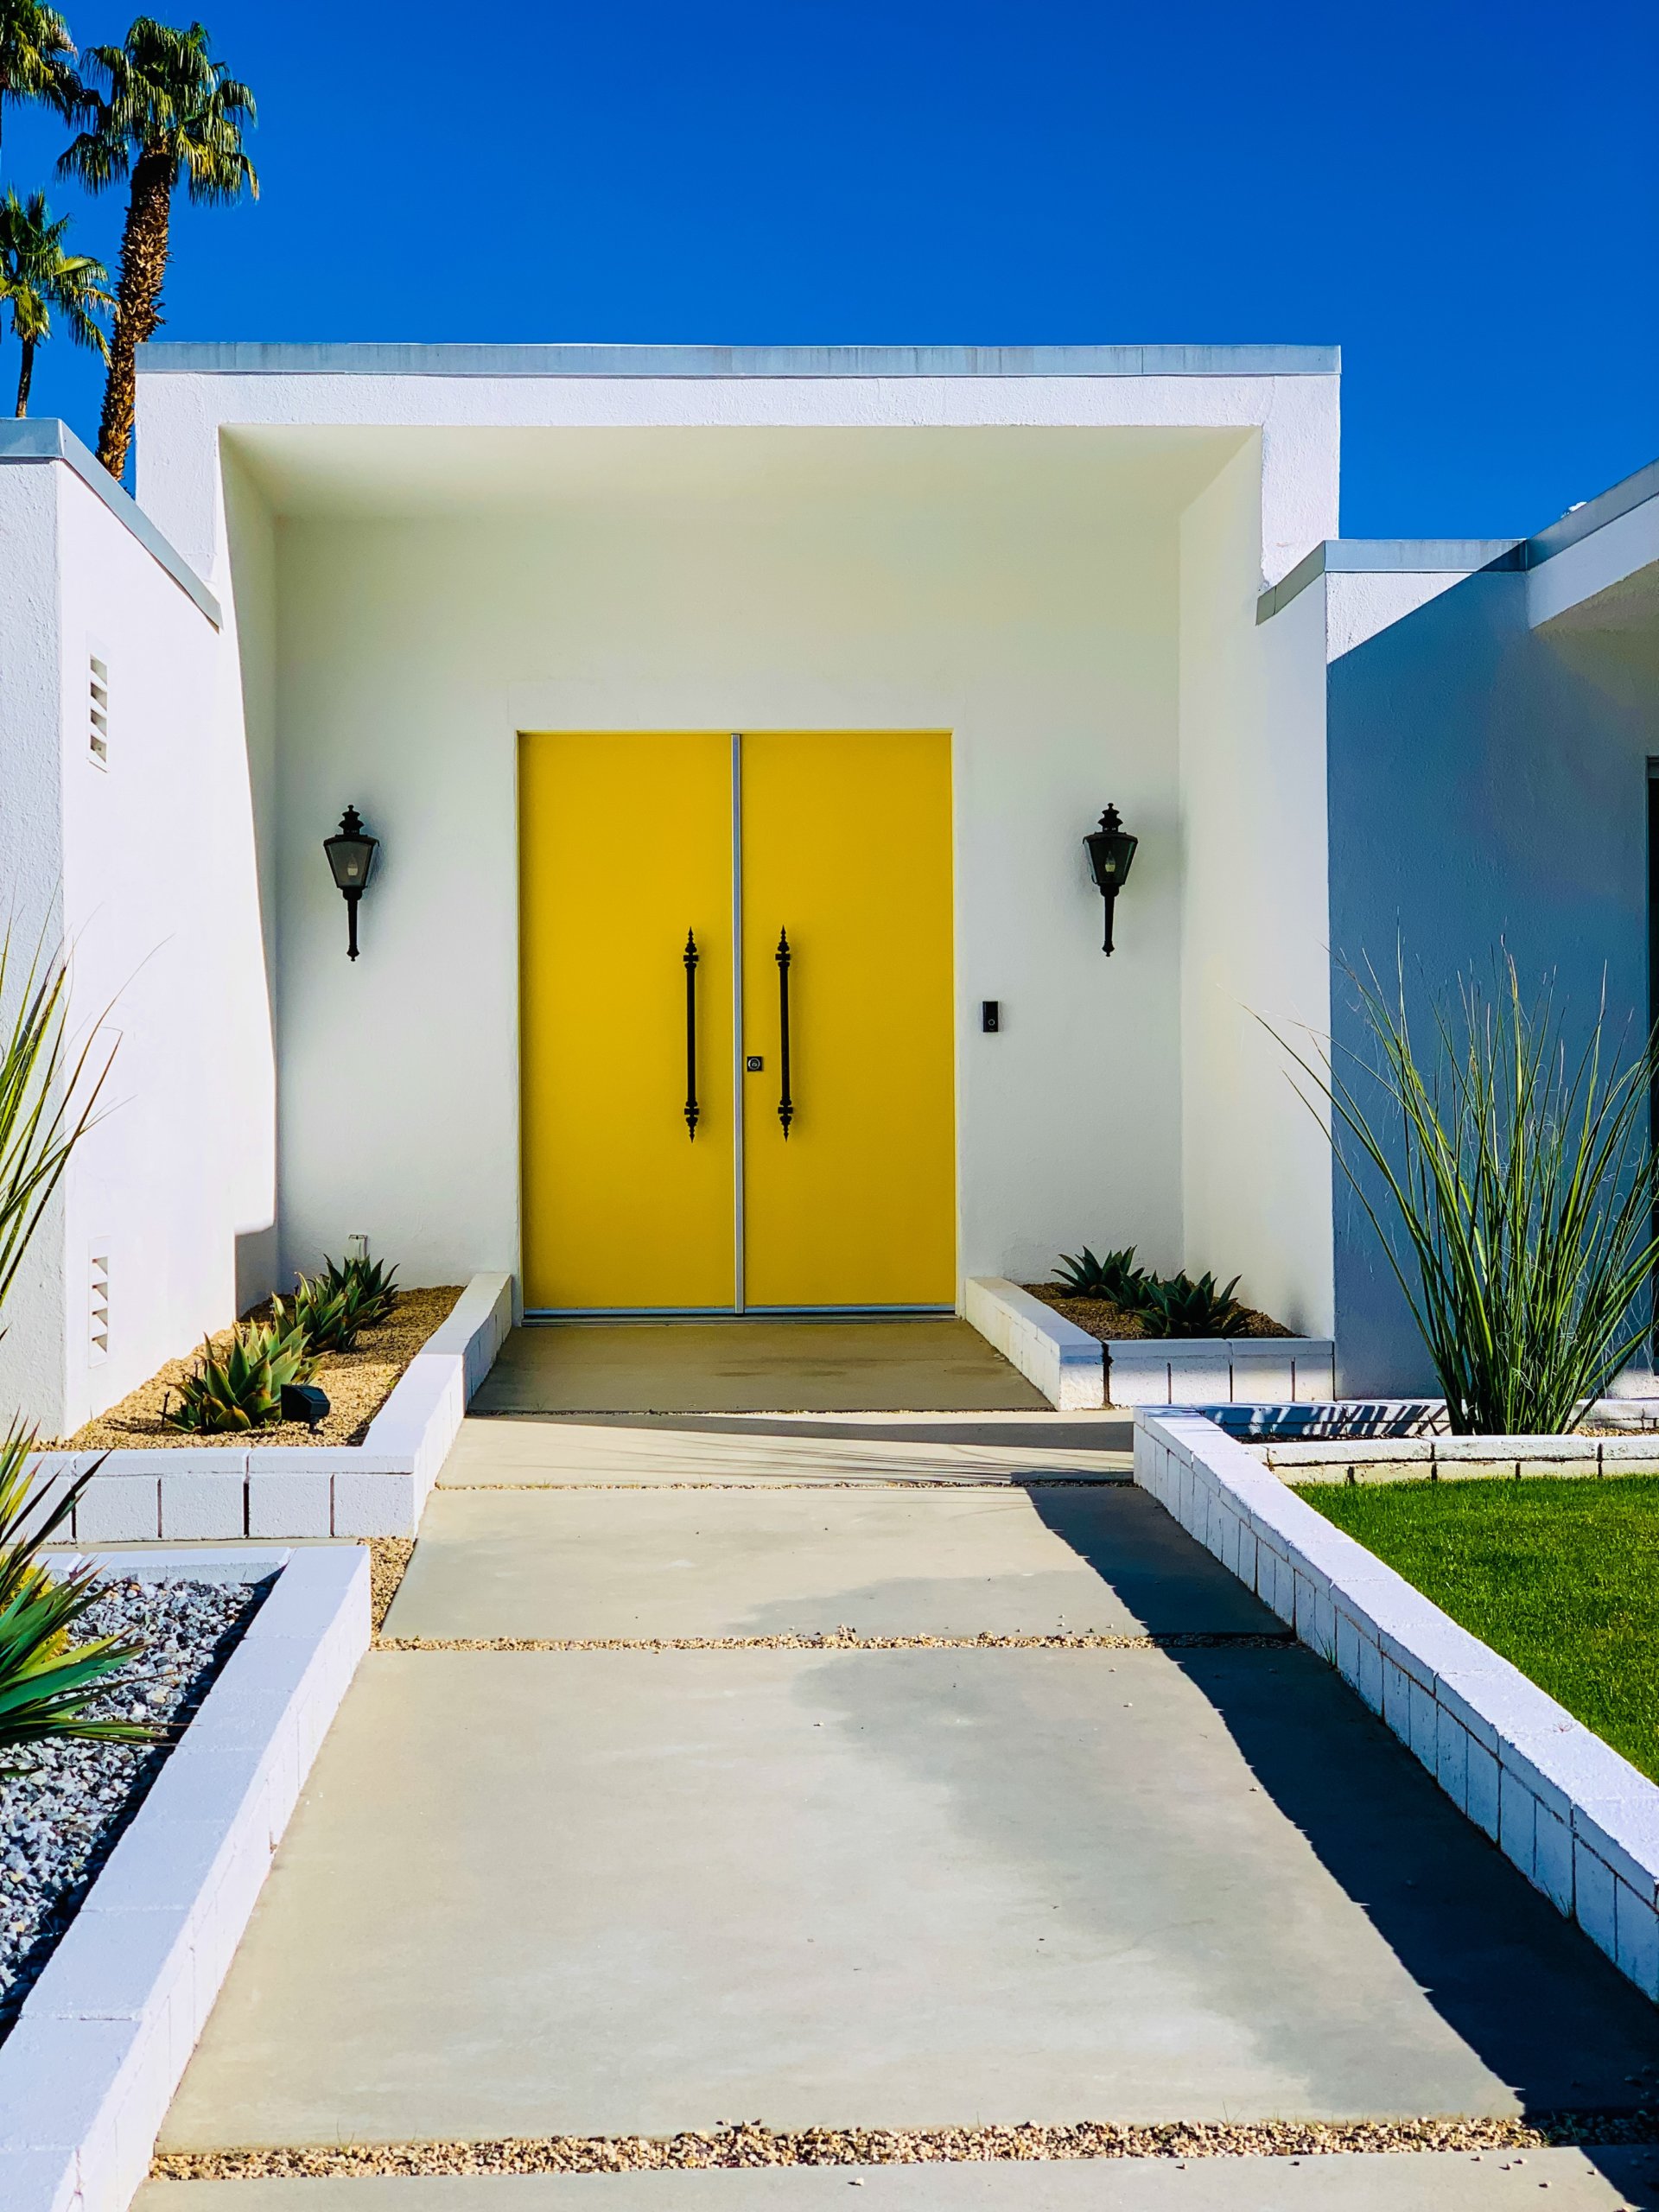 White wall with yellow door and black lamps